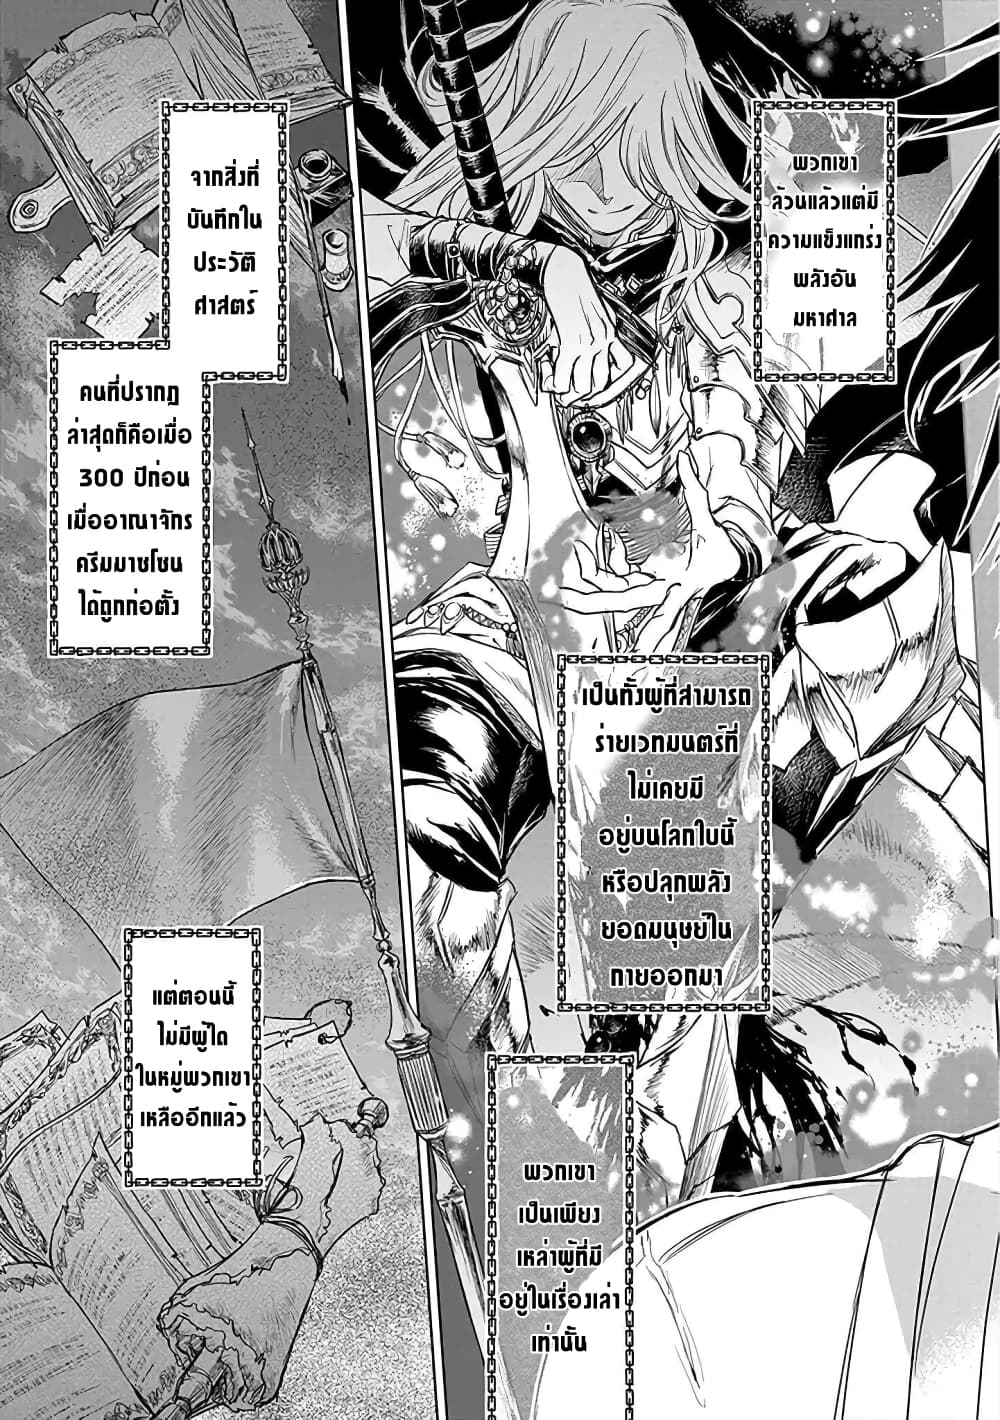 Ori of the Dragon Chain Heart in the Mind 9 (7)